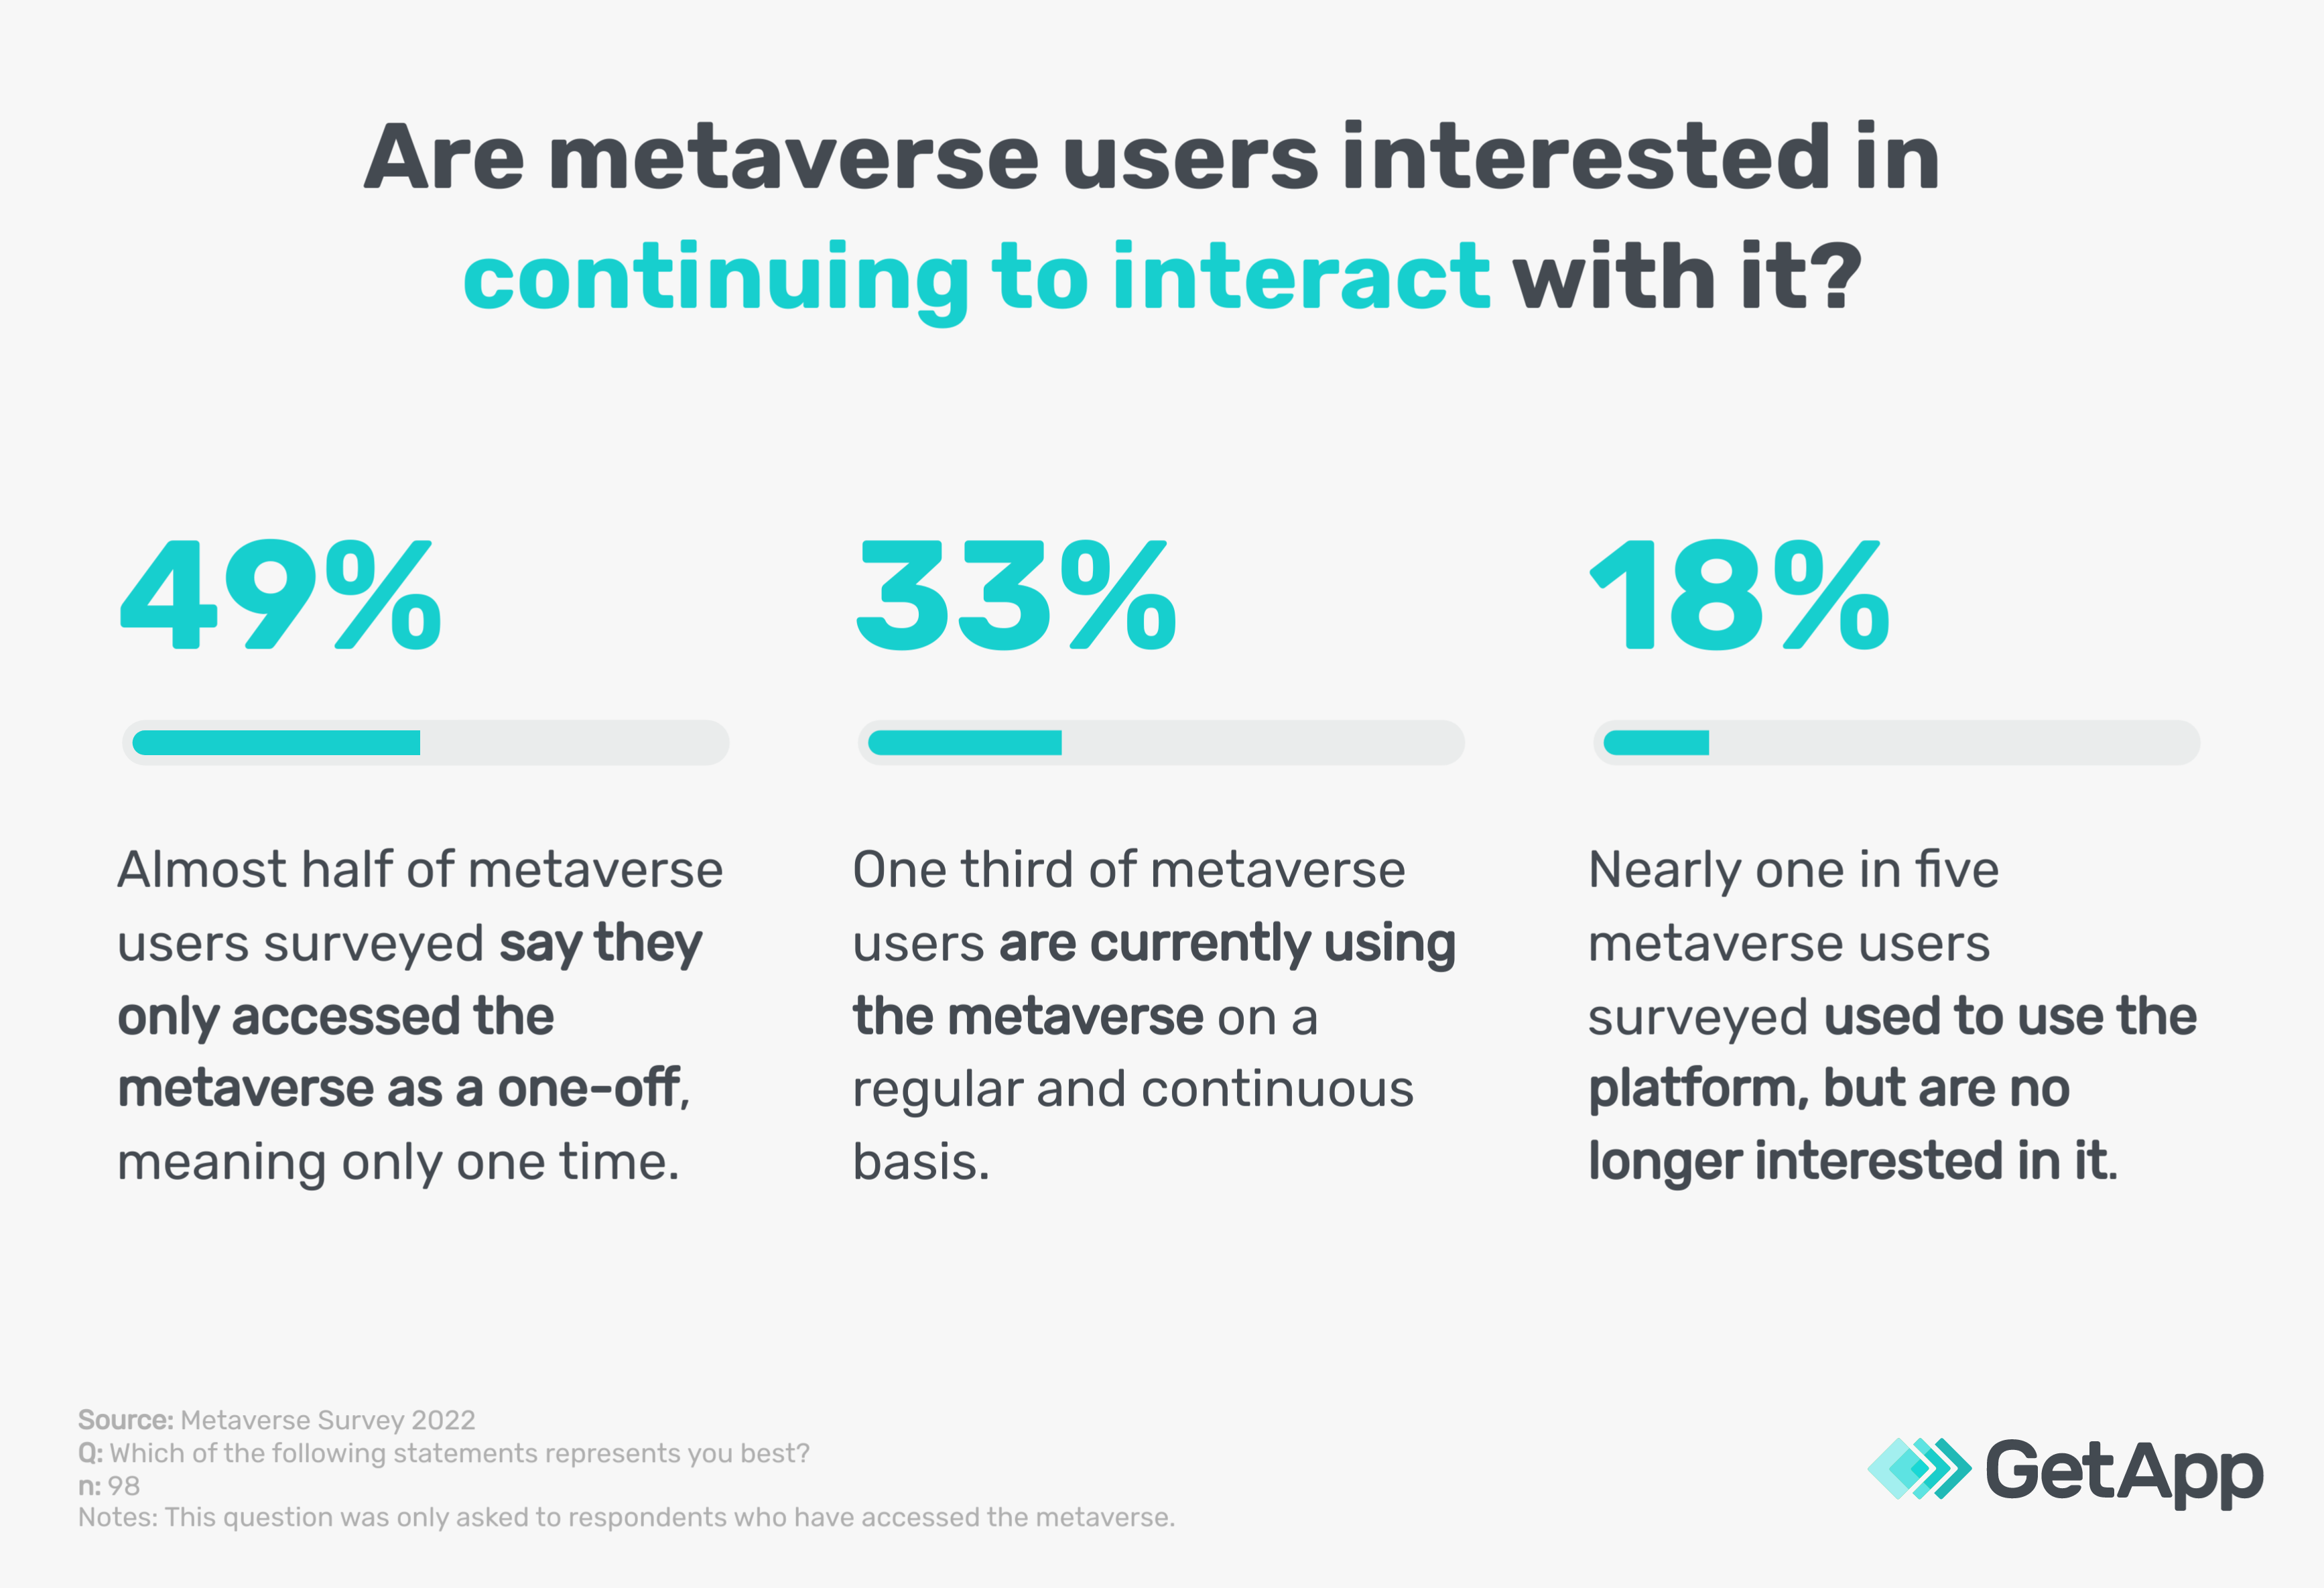 will users continue using the metaverse?